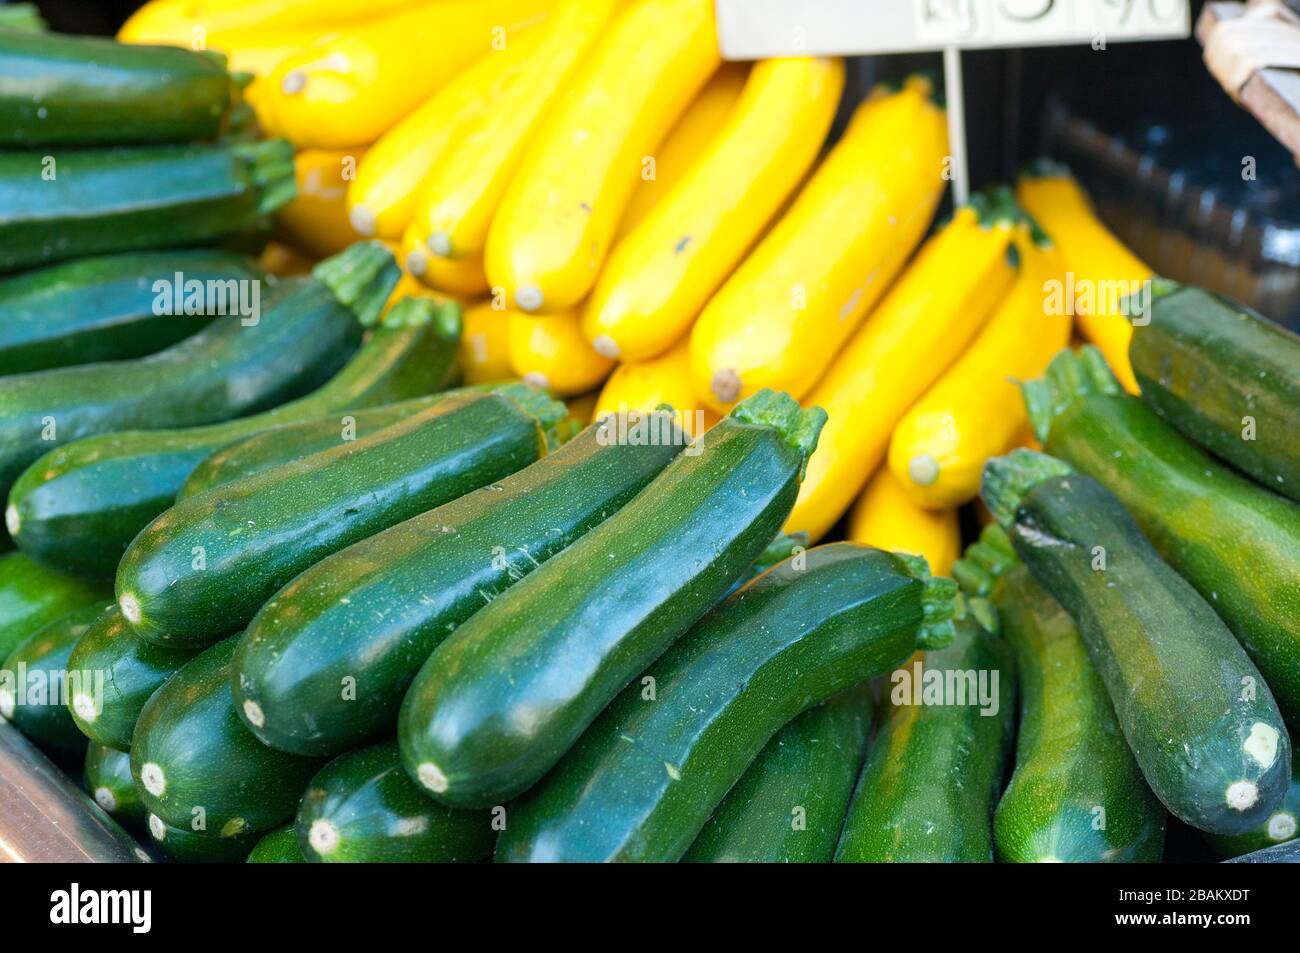 zucchini to the market for sale Stock Photo